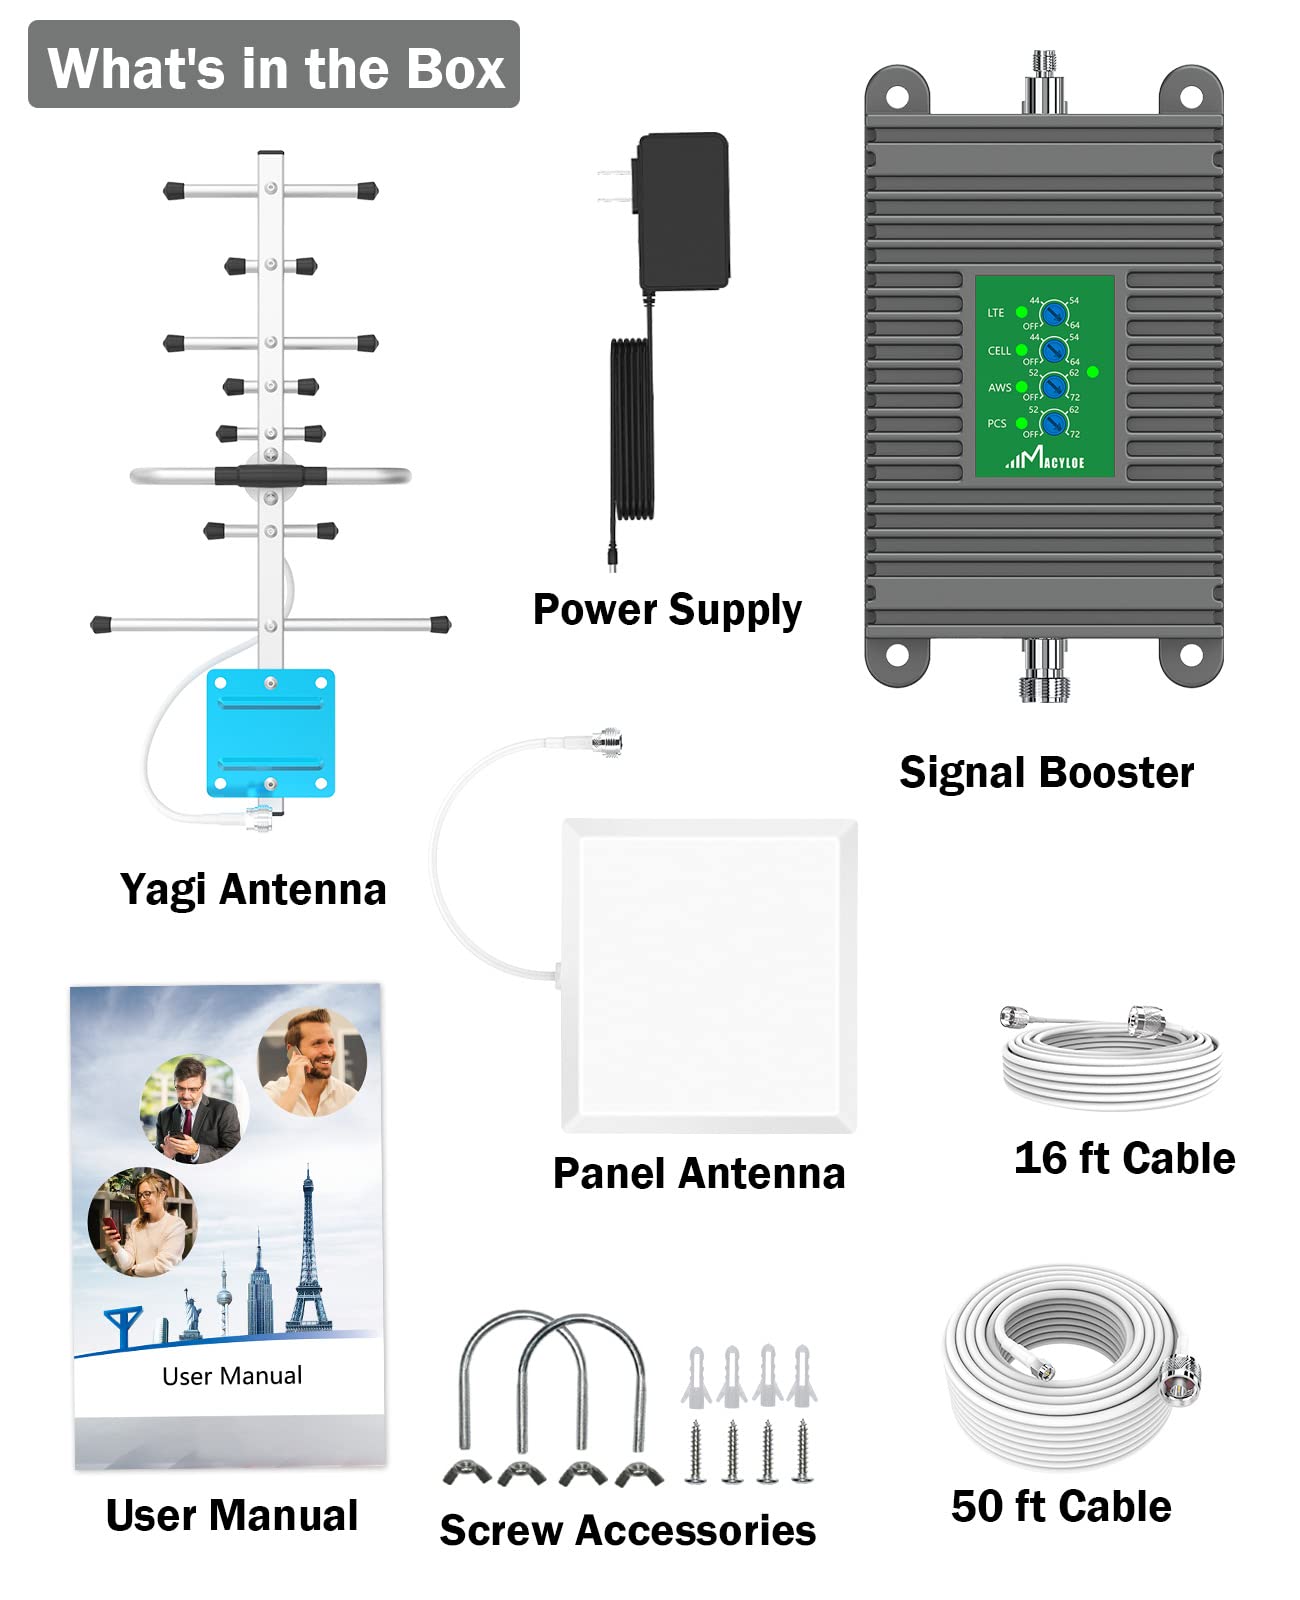 Verizon Cell Phone Booster for Home Boosts All U.S. Carriers 700/850/1700/1900/2100Mhz GSM 3G/4G/5G CDMA LTE for Verizon, AT&T, T Mobile, US Cellular Cell Phone Signal Booster FCC Approved